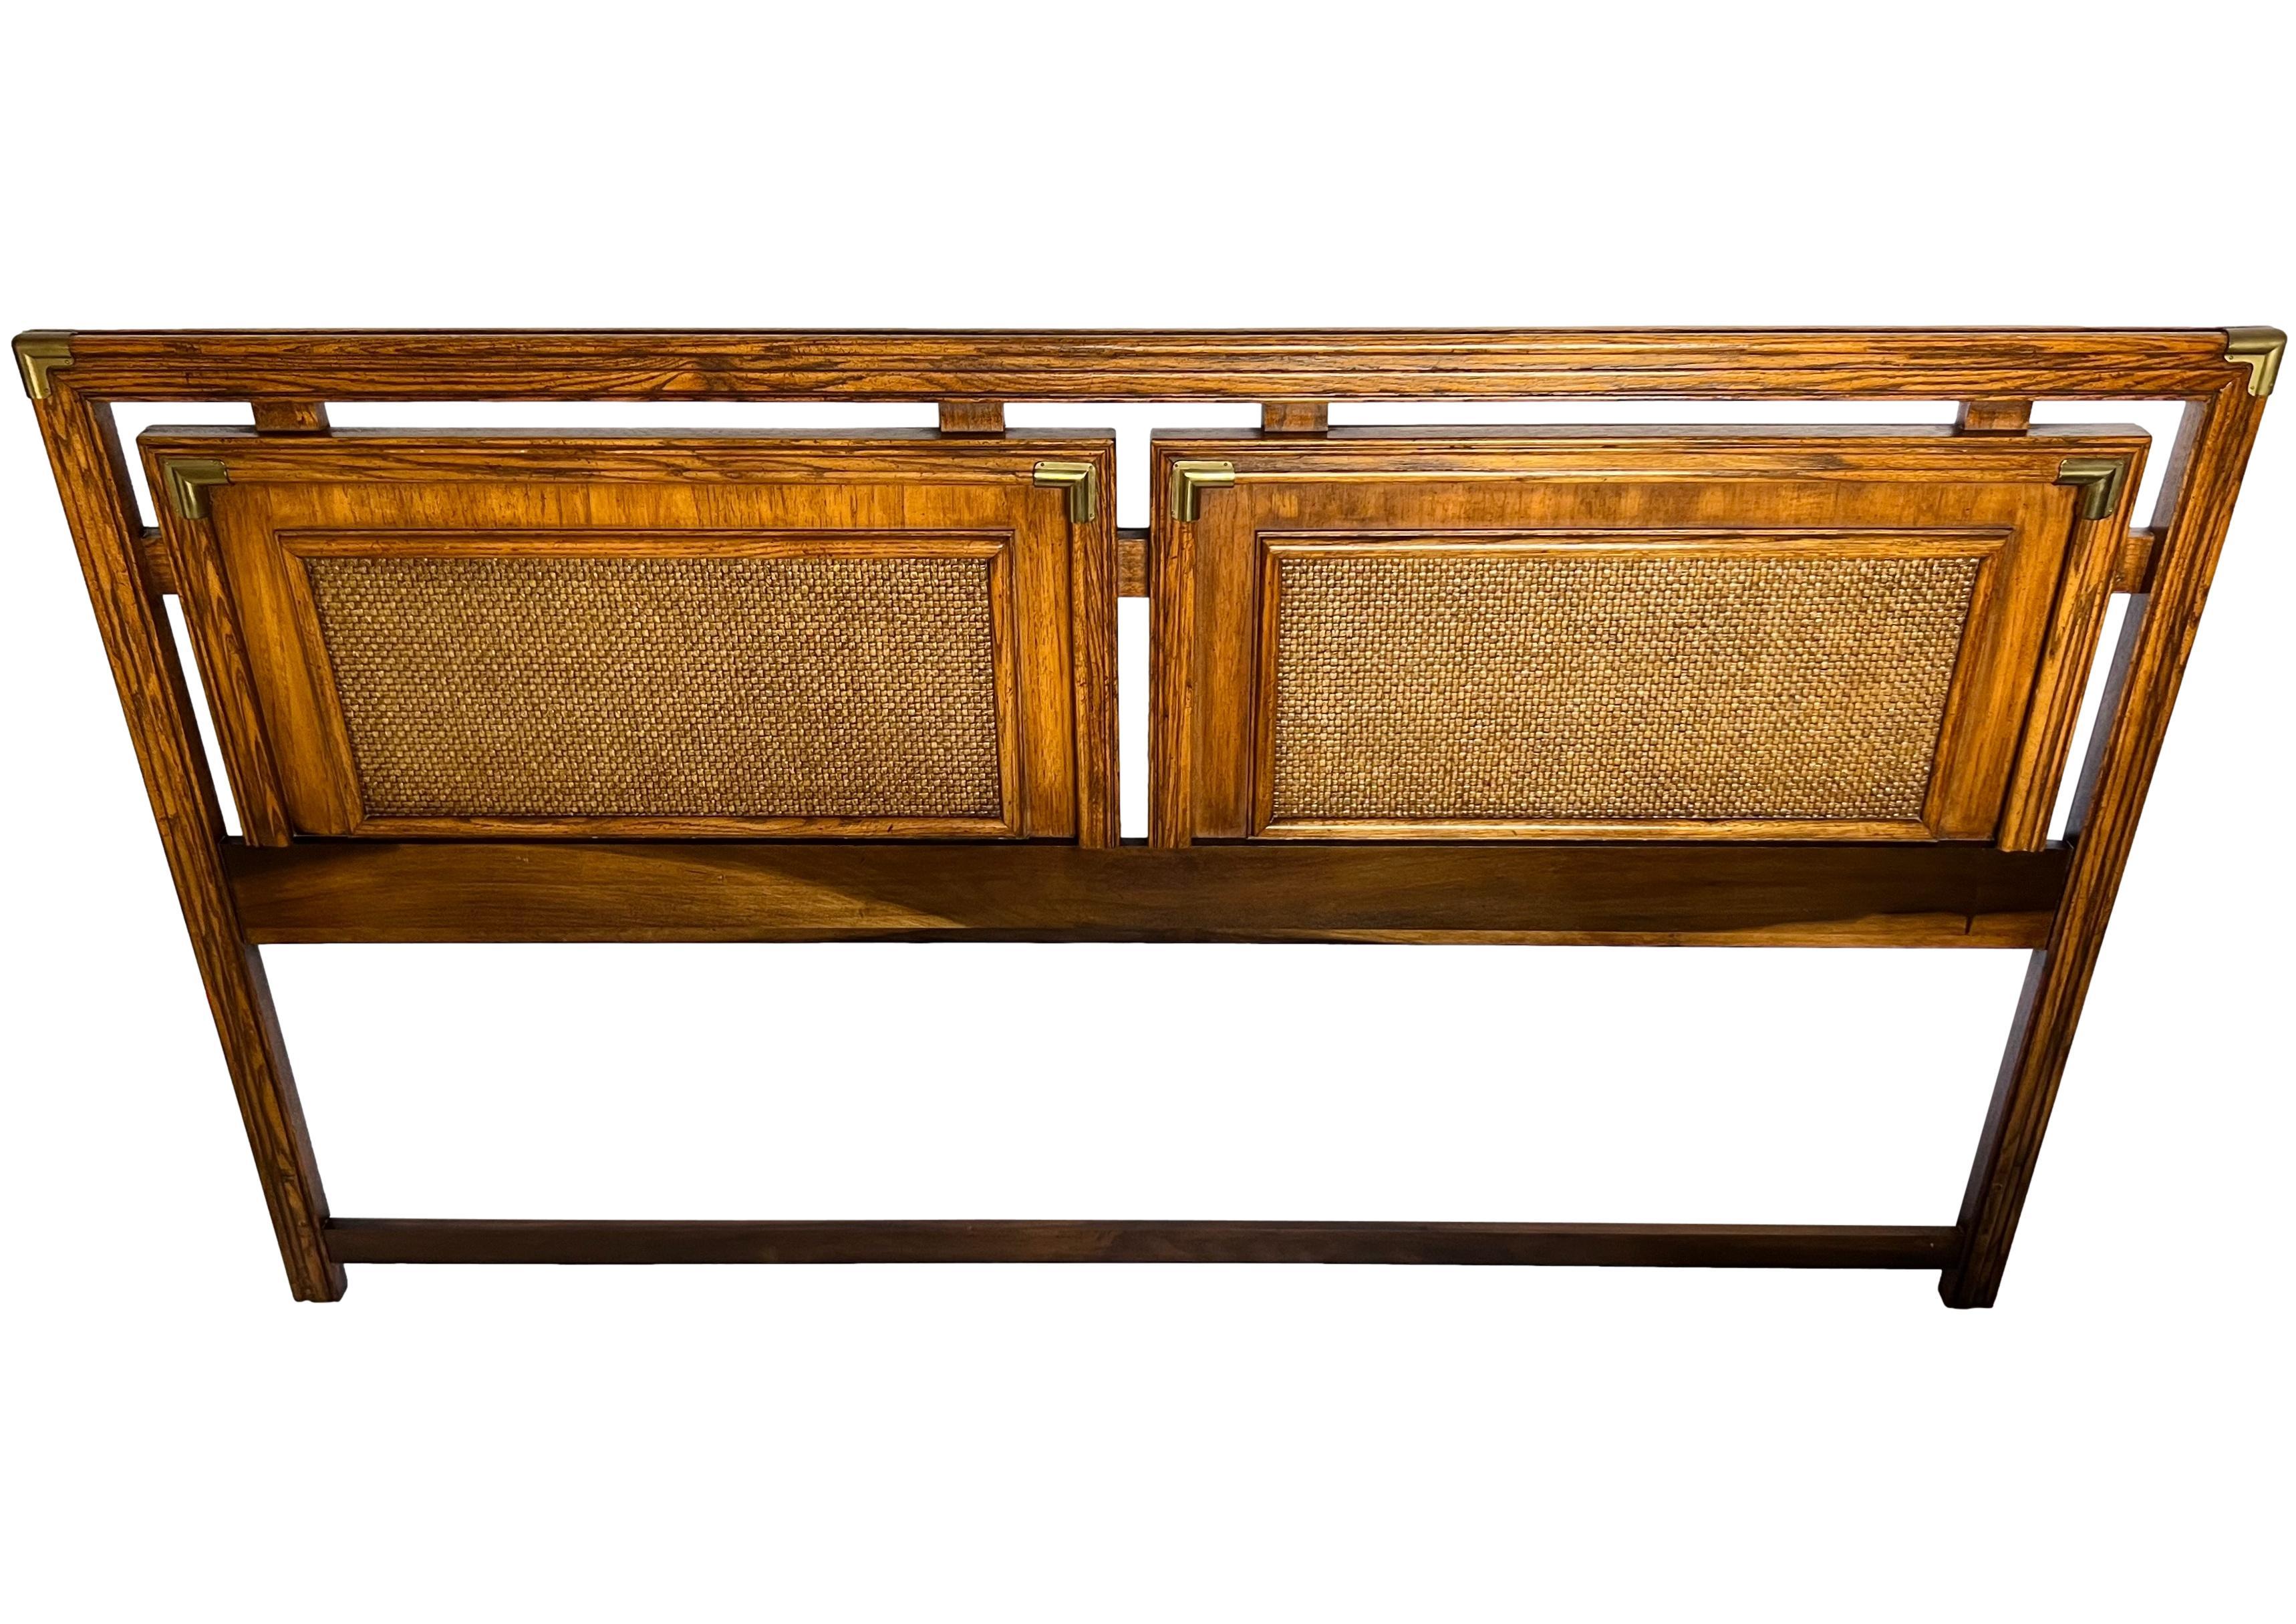 20th Century Mid-Century Modern Campaign King Headboard For Sale